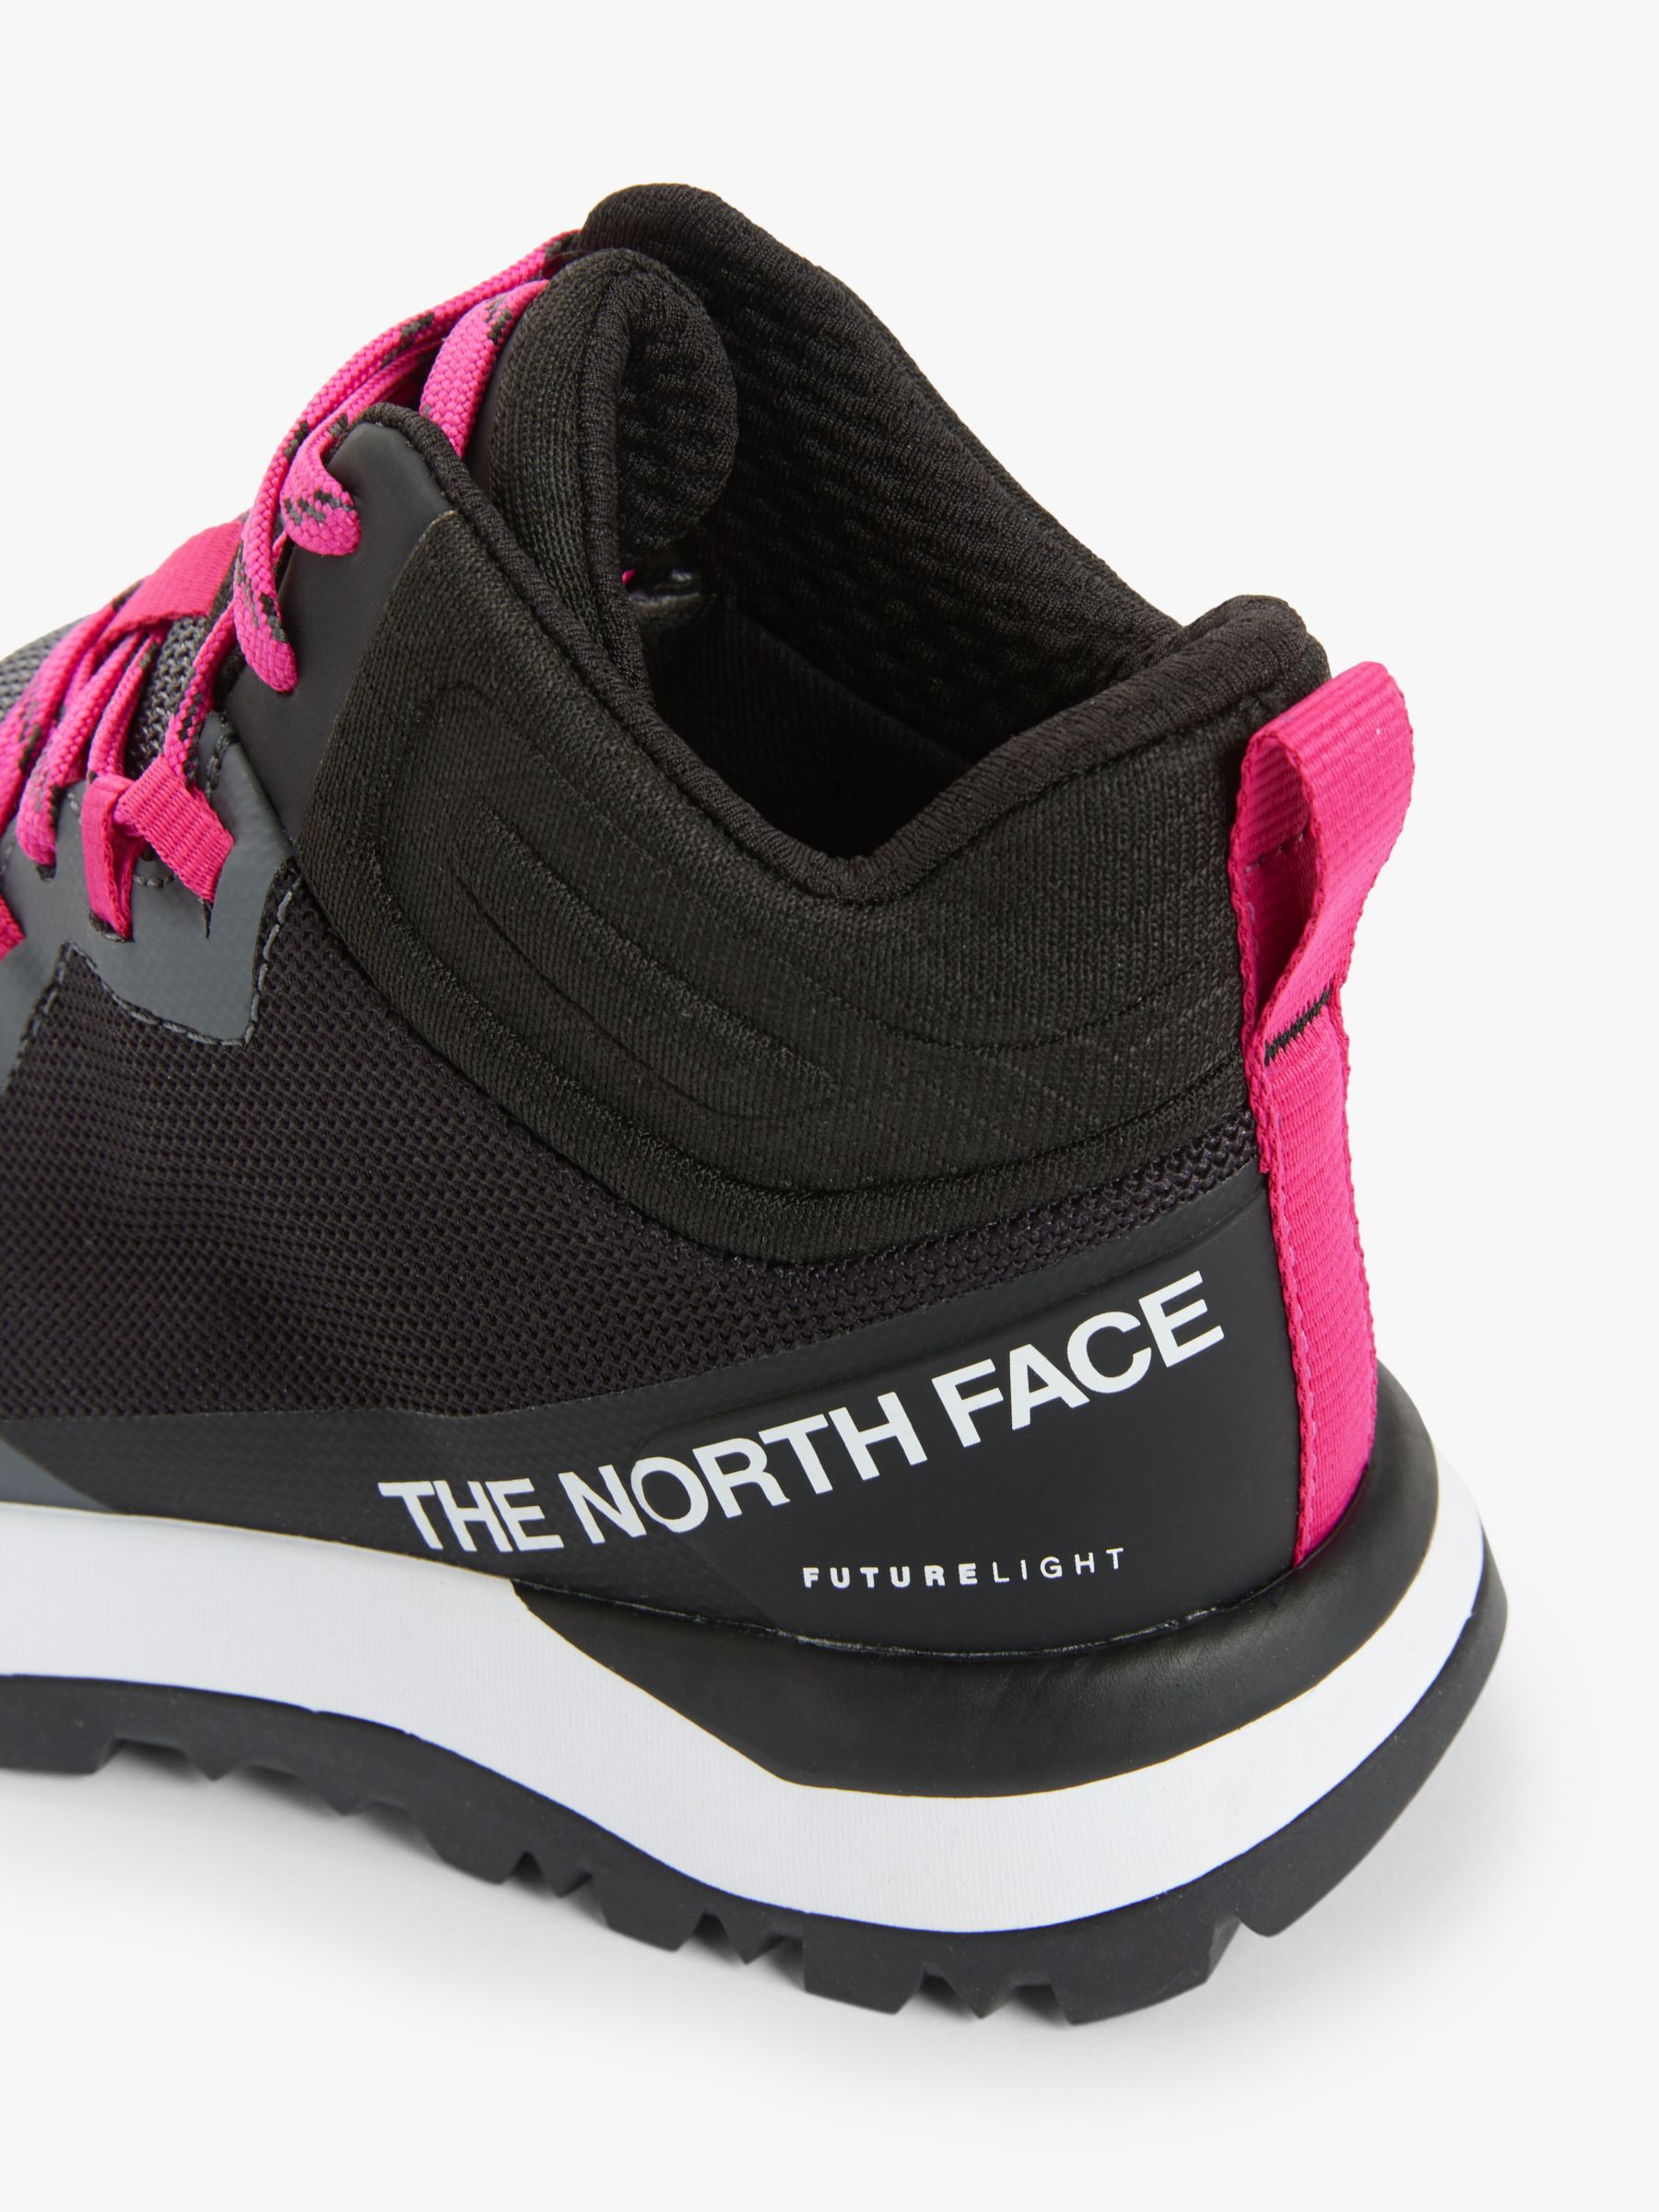 north face waterproof shoes women's